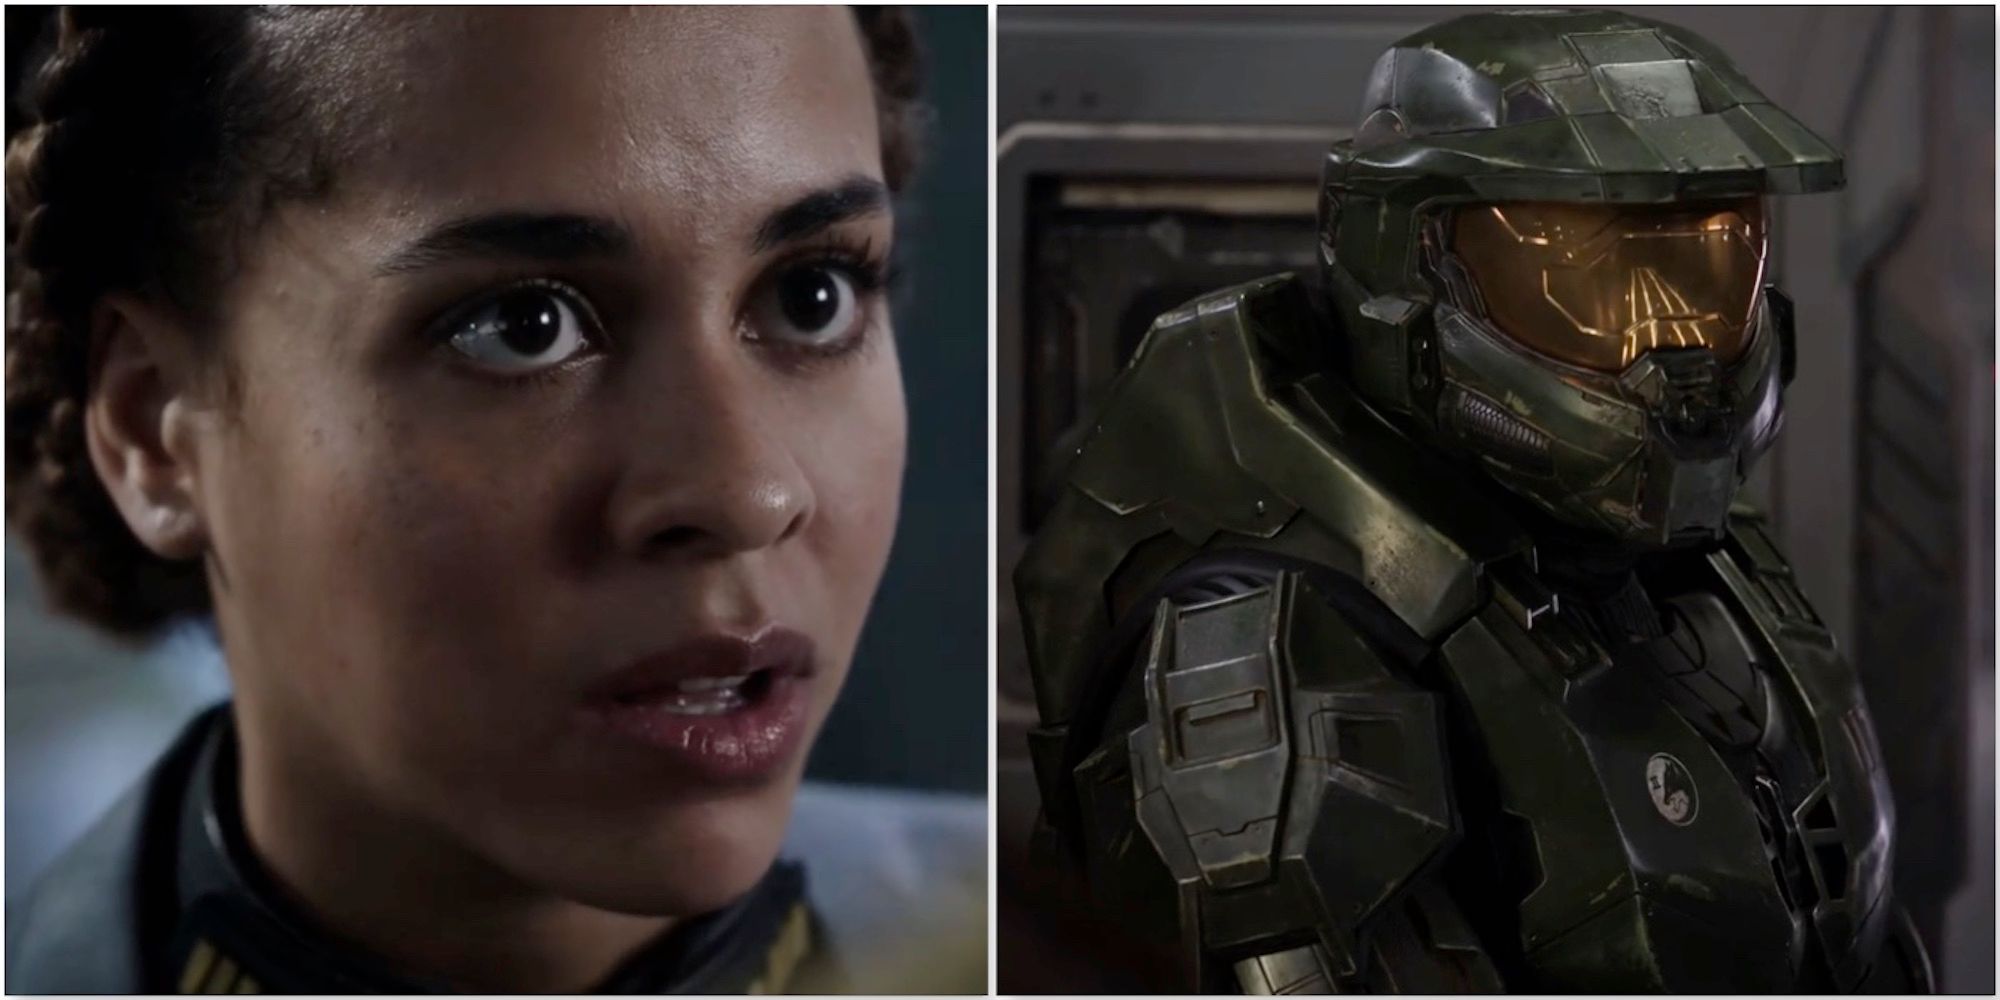 Miranda and Master Chief from the Halo TV show